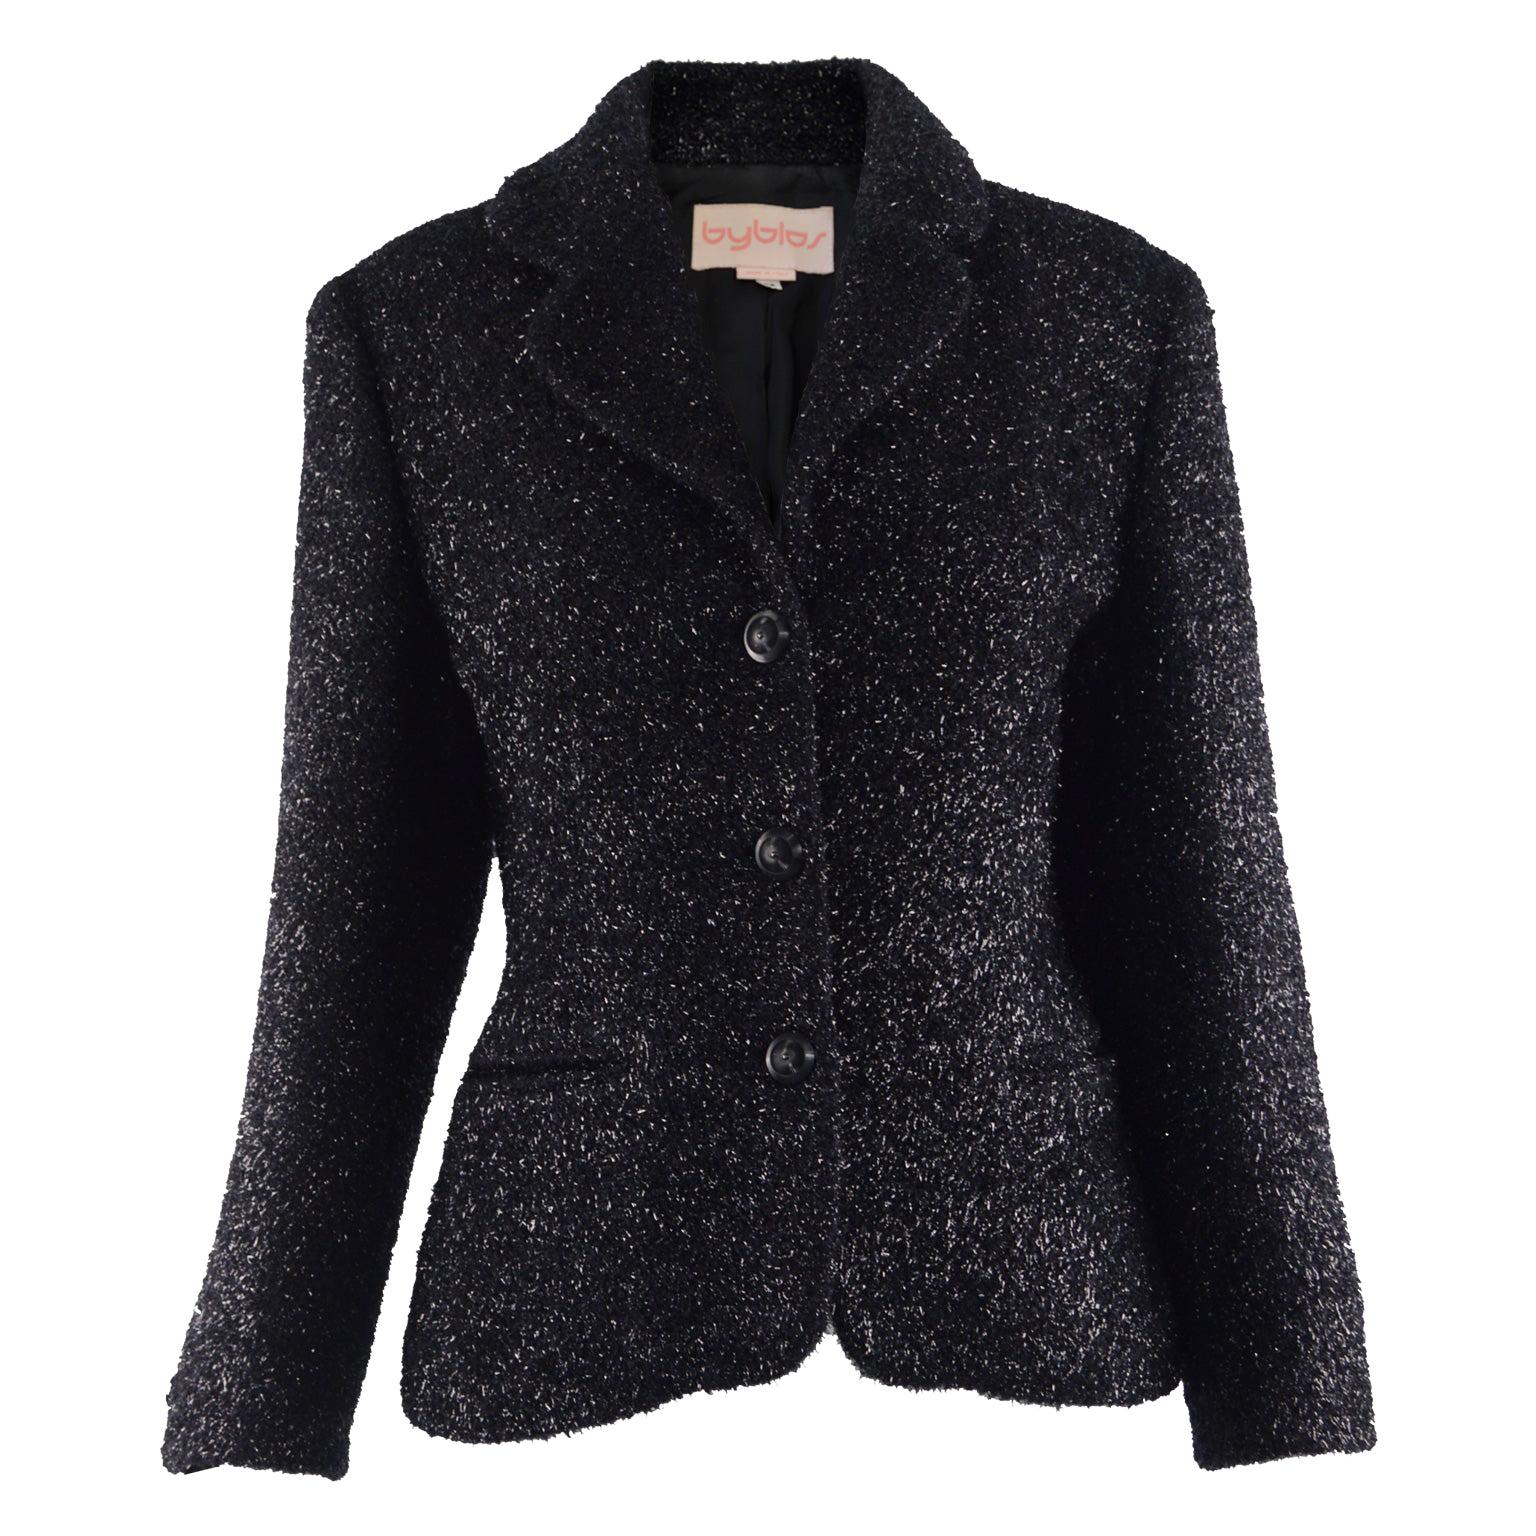 Byblos Vintage Womens Black Sparkly Fuzzy Fabric Party Jacket, 1980s